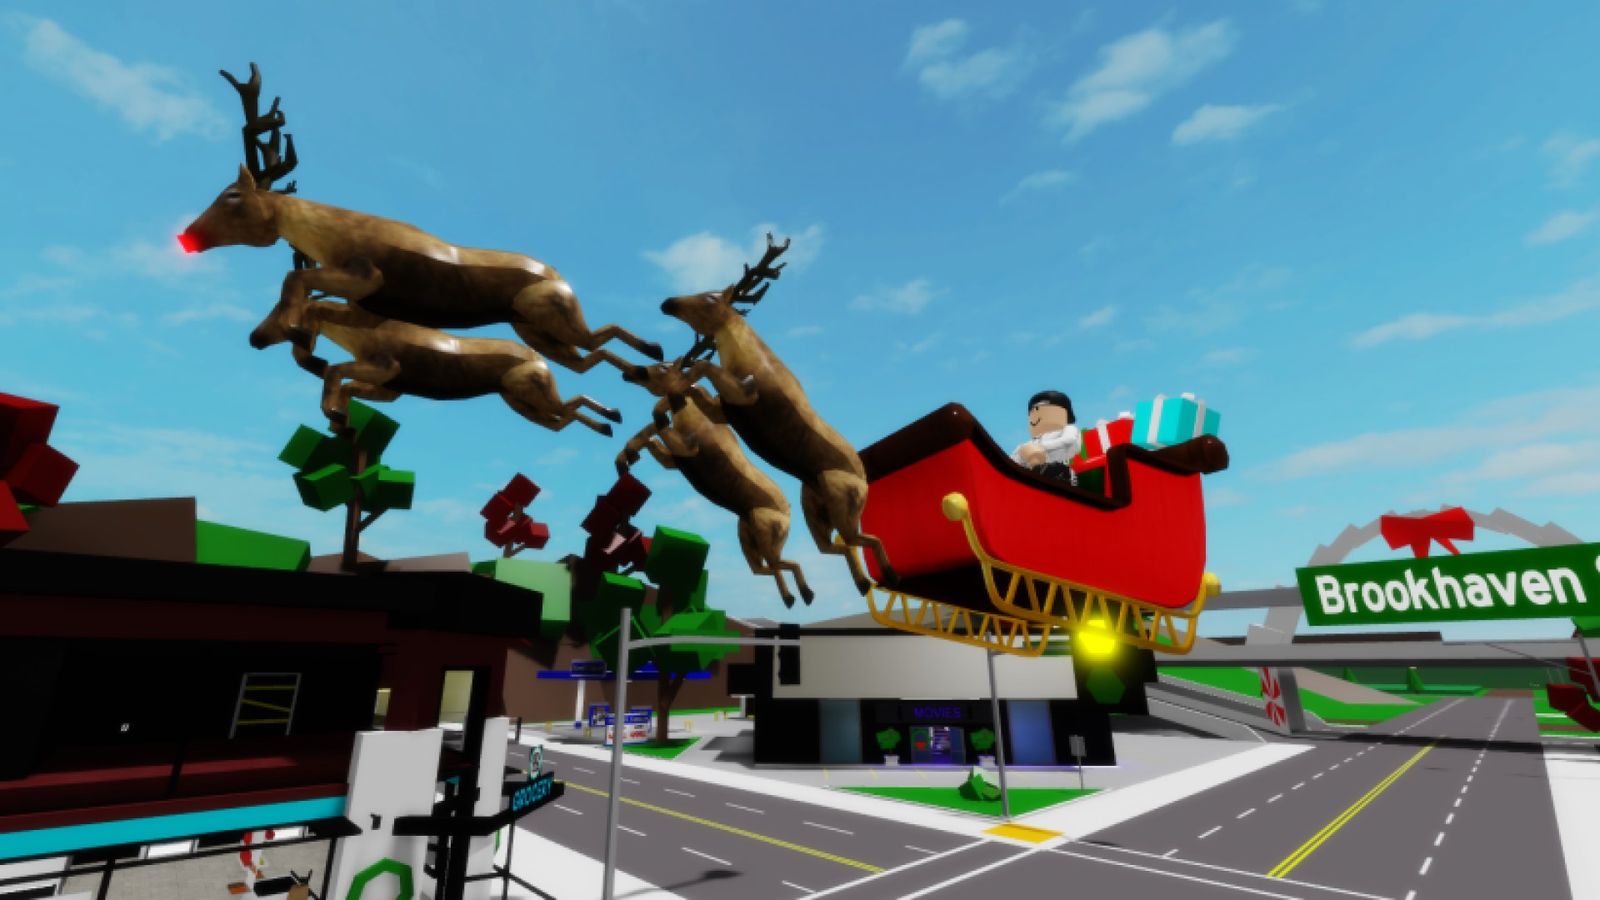 A Roblox character riding a sleigh in Brookhaven.